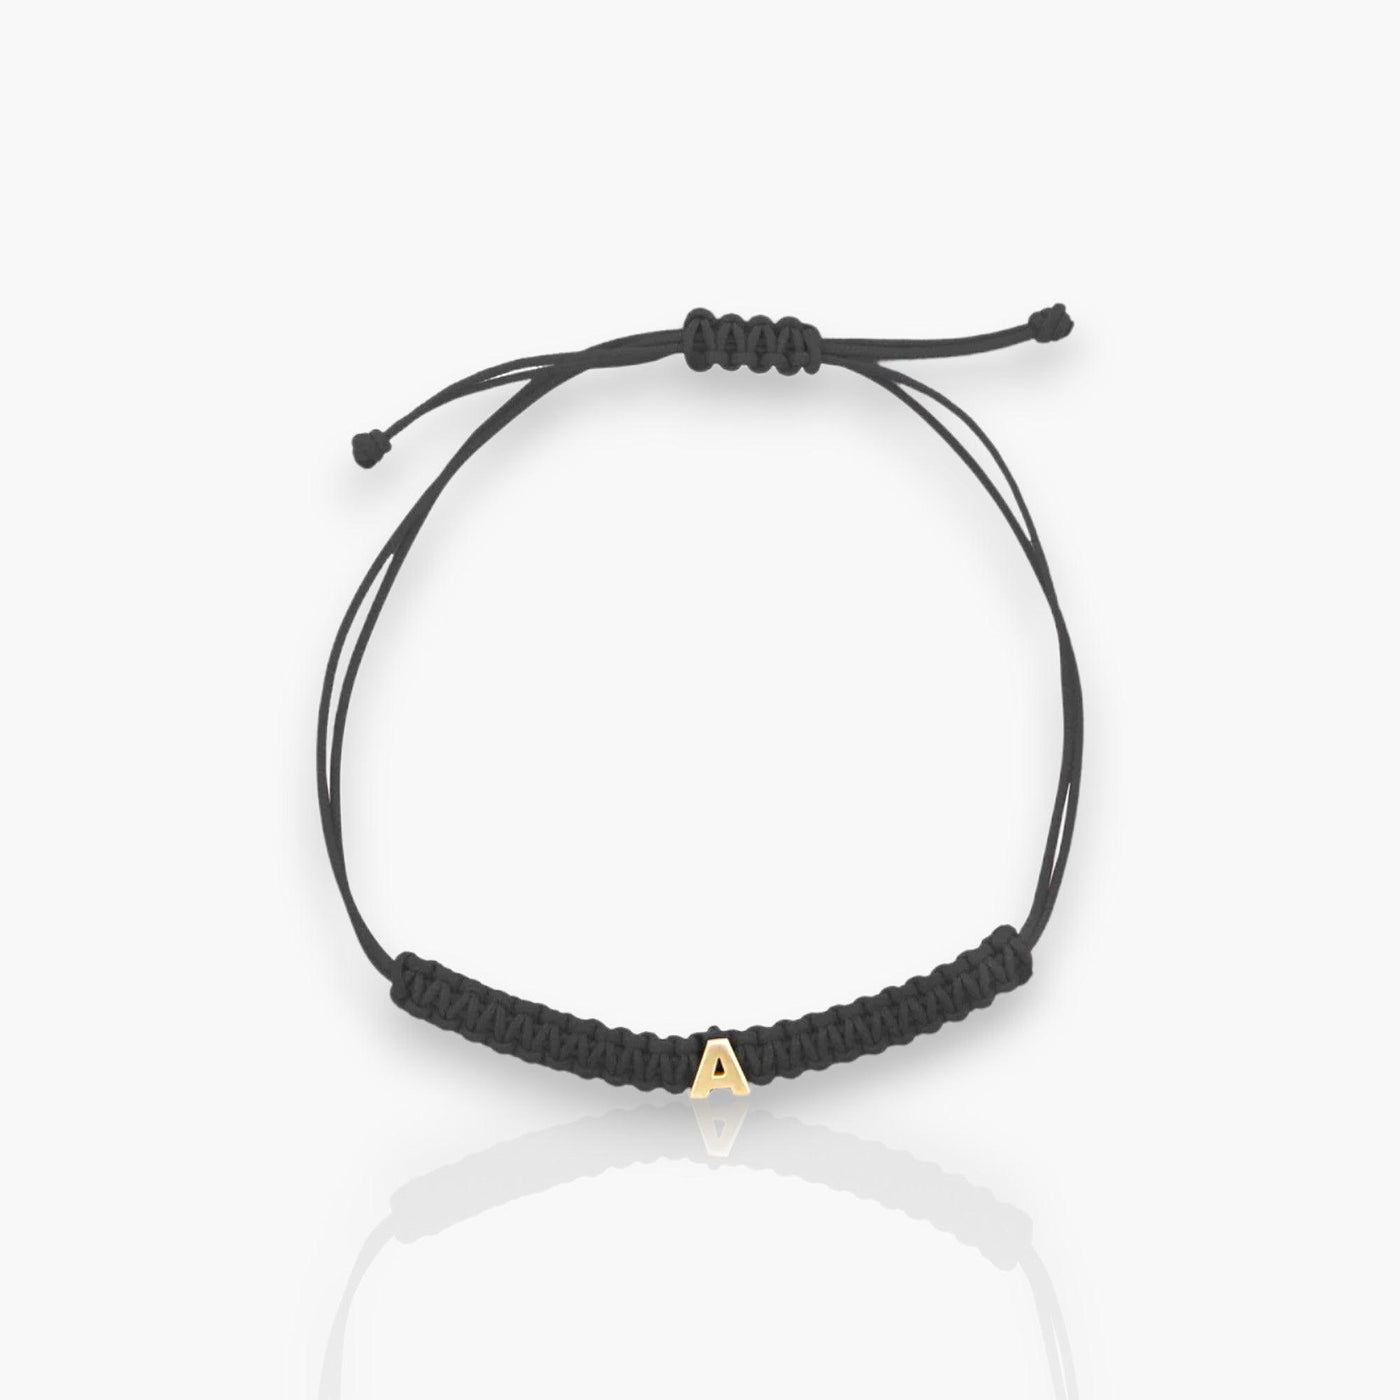 Customizable Black Fabric Bracelet with 18kt gold letters - Moregola Fine Jewelry